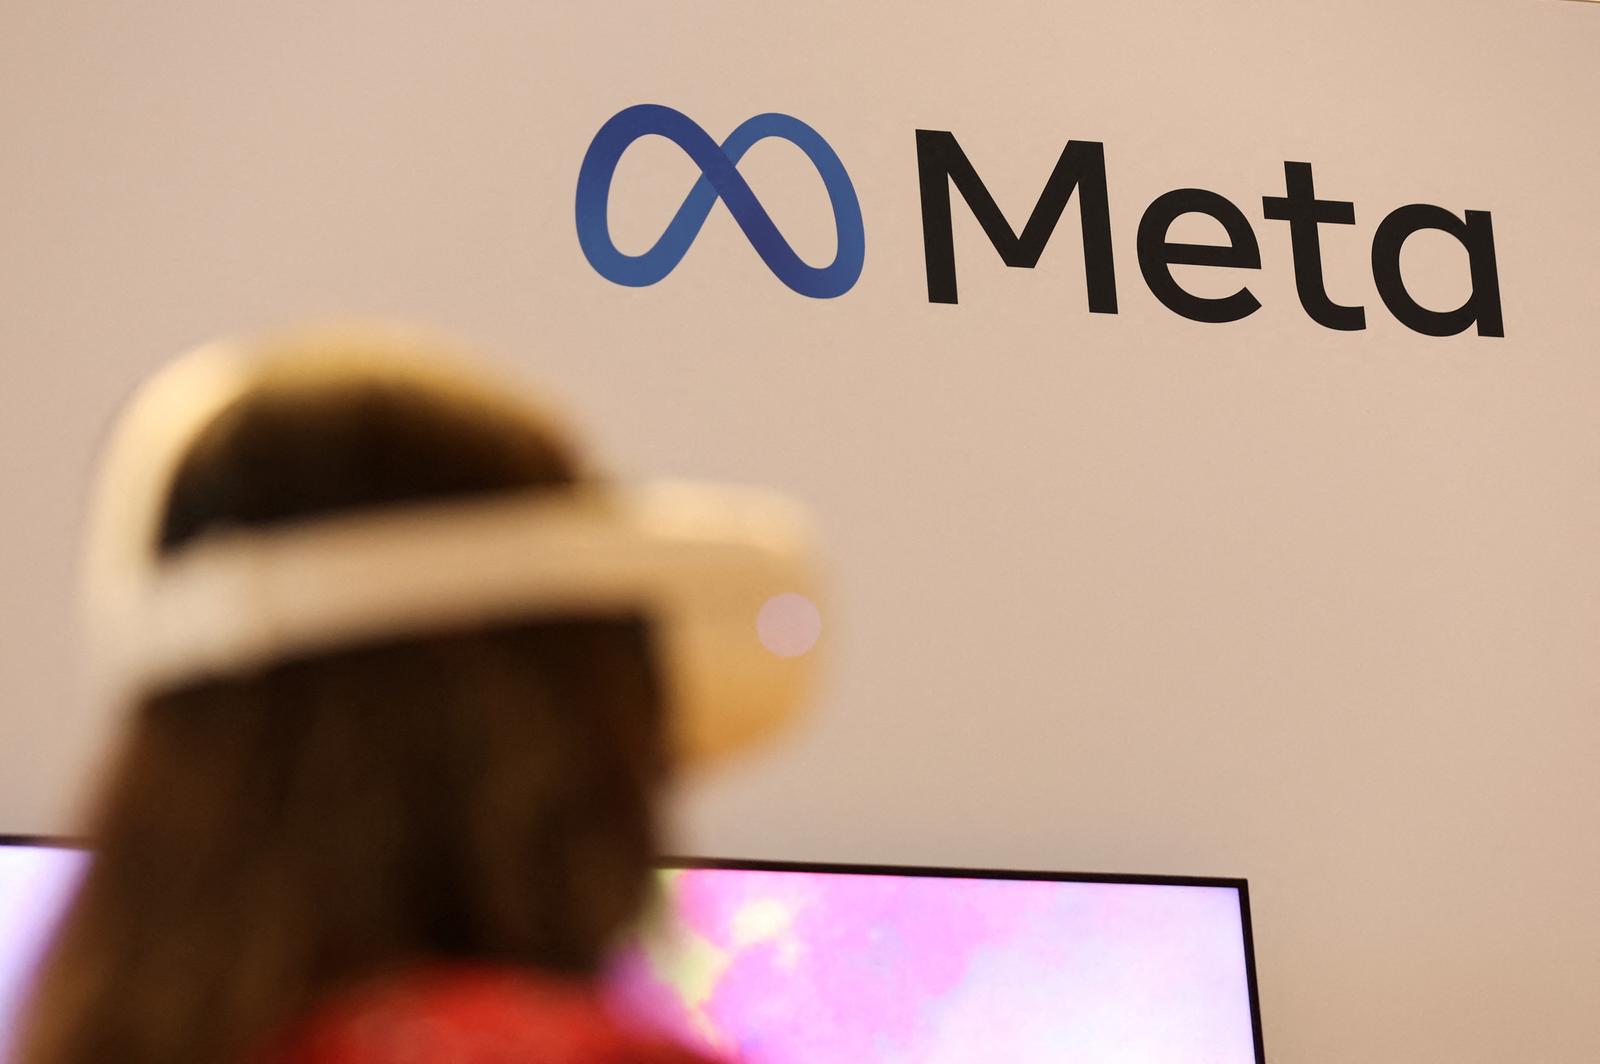 FILE PHOTO: A person uses virtual reality headset at Meta stand during the ninth Summit of the Americas in Los Angeles, California, U.S., June 8, 2022. REUTERS/Mike Blake/File Photo Photo: MIKE BLAKE/REUTERS